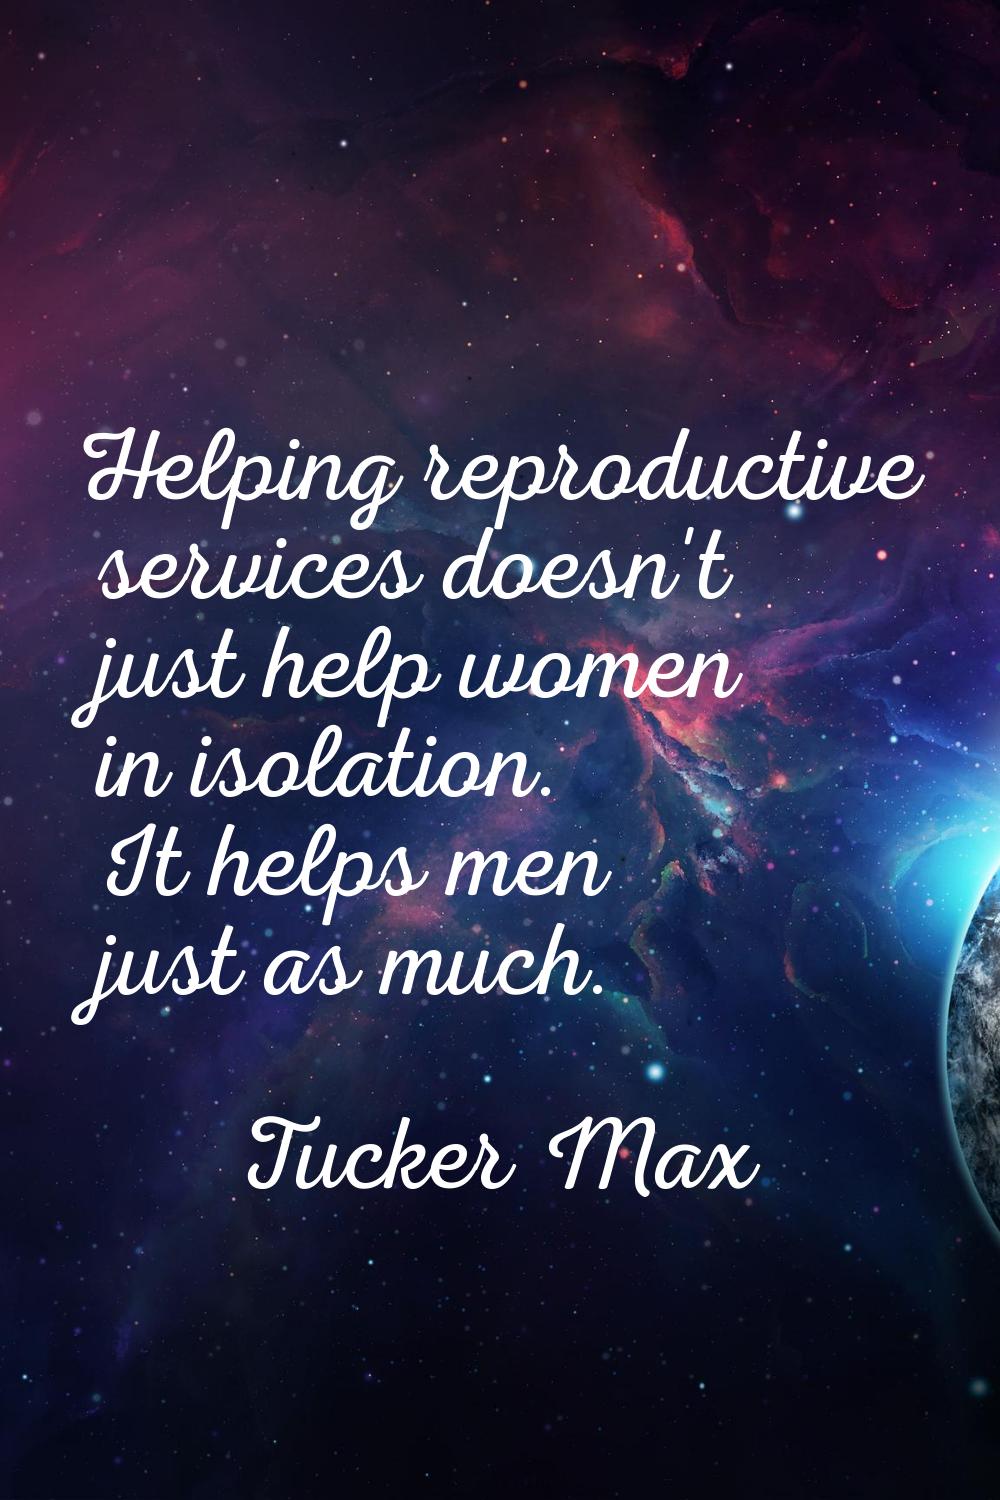 Helping reproductive services doesn't just help women in isolation. It helps men just as much.